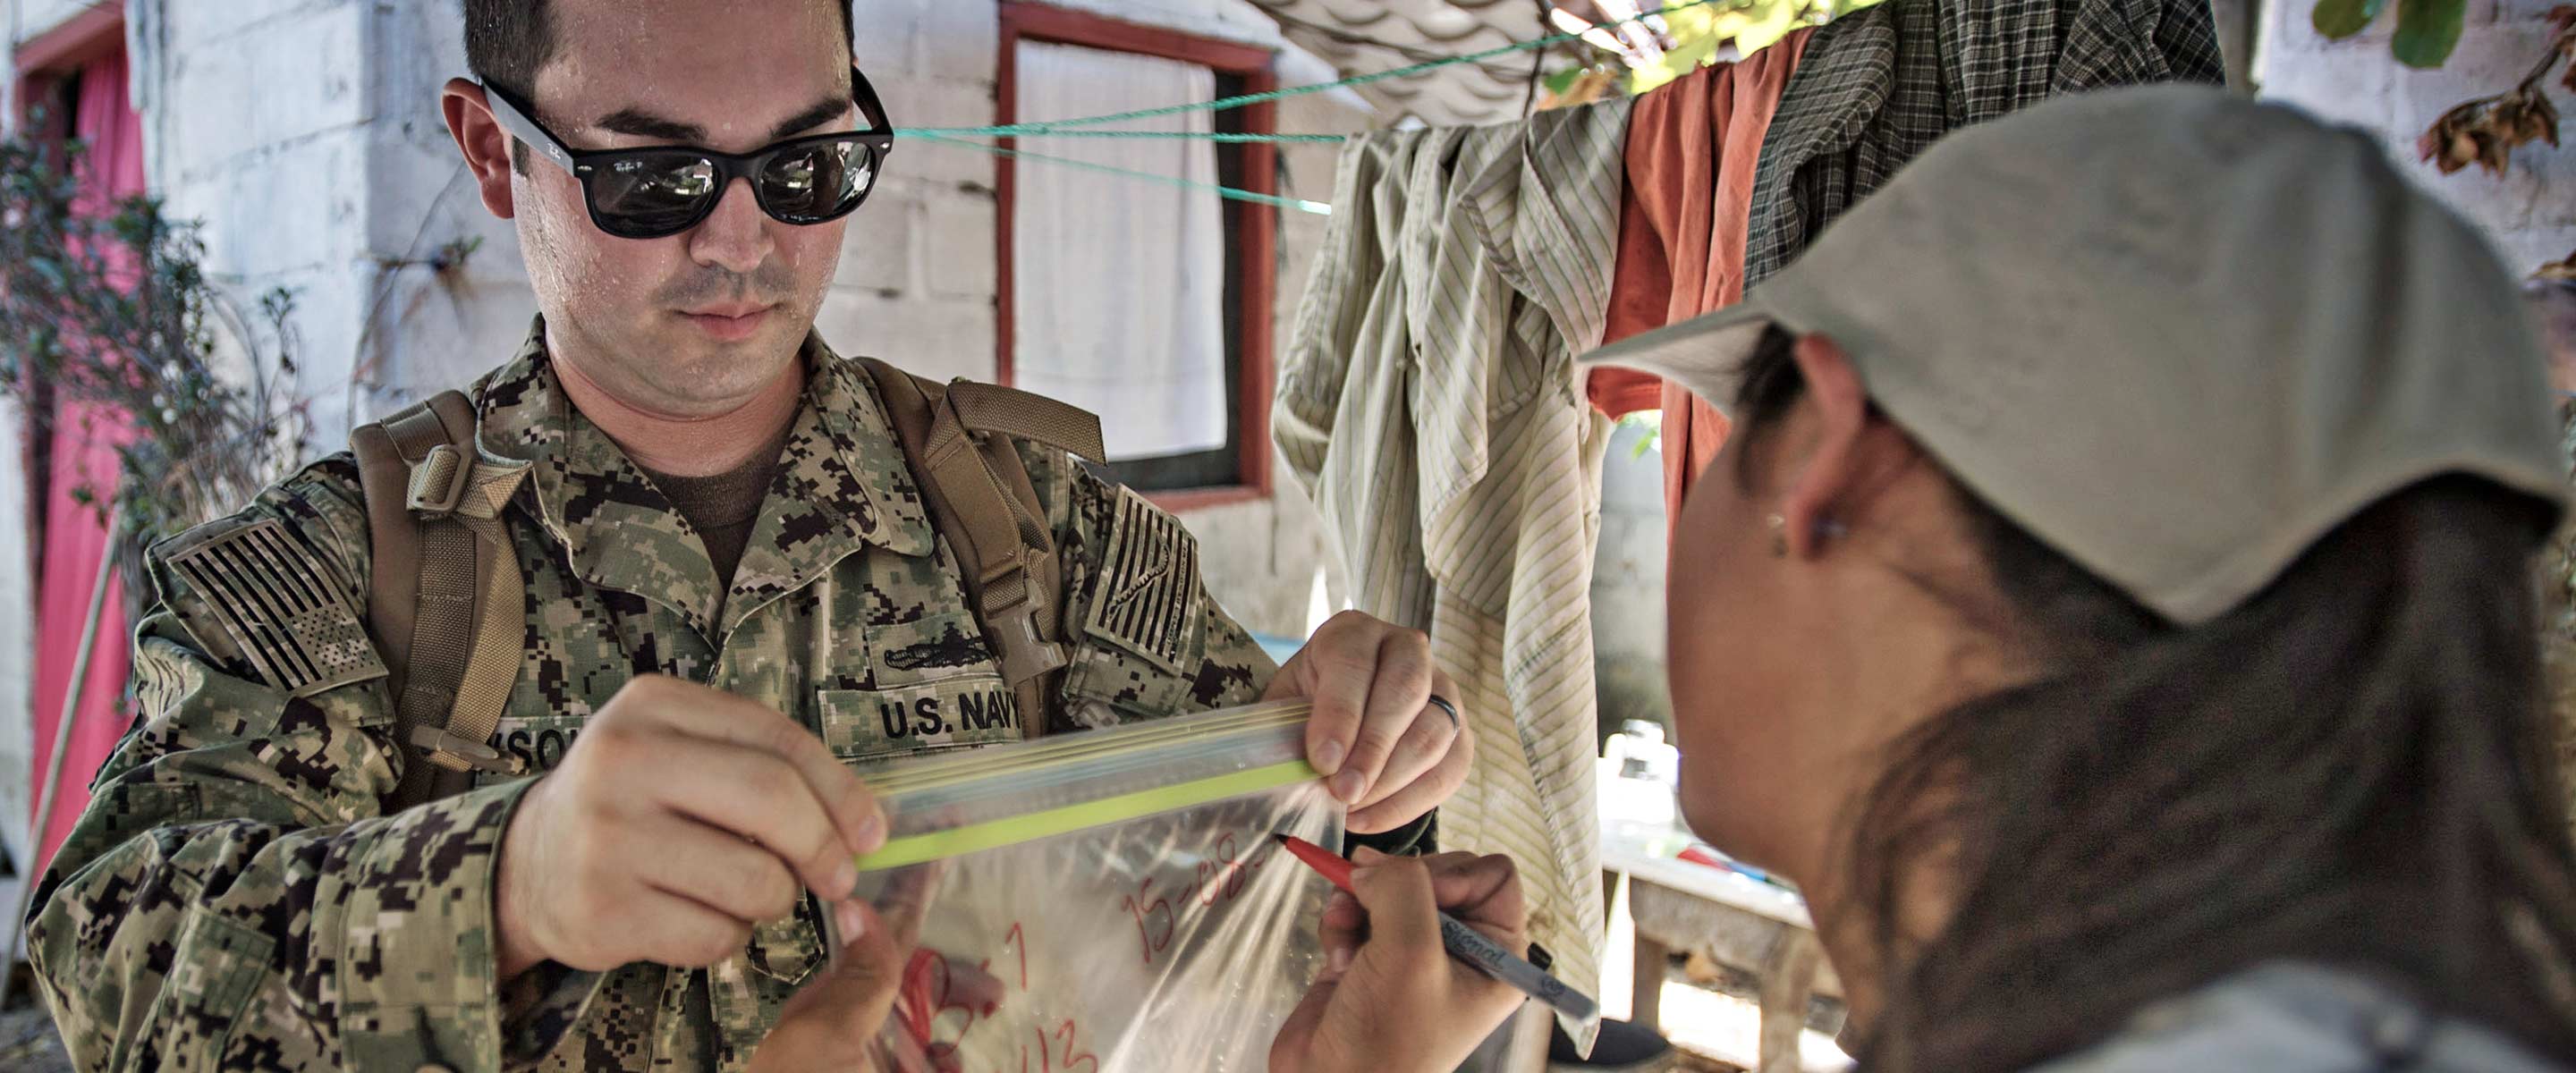 Navy Entomologists conducting research in the field